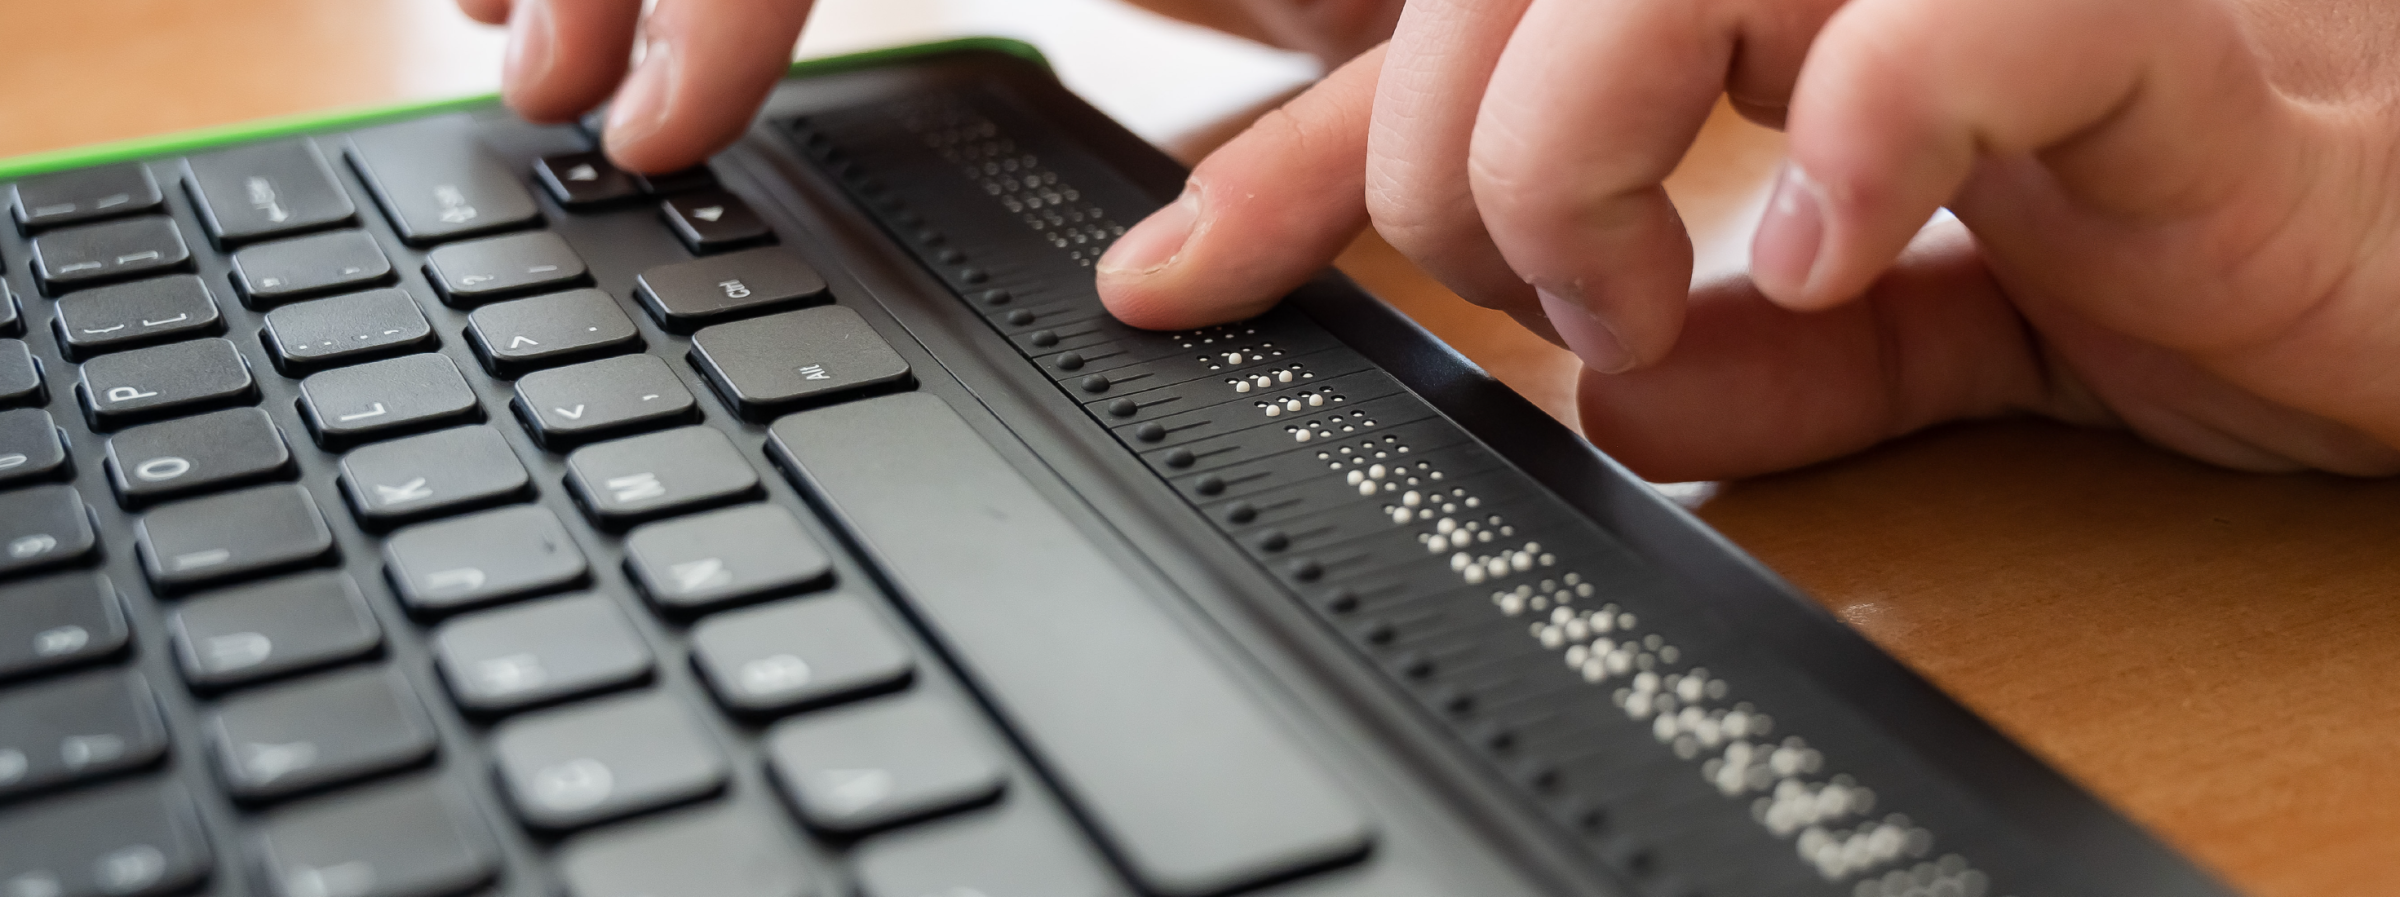 A person using a braille keyboard.